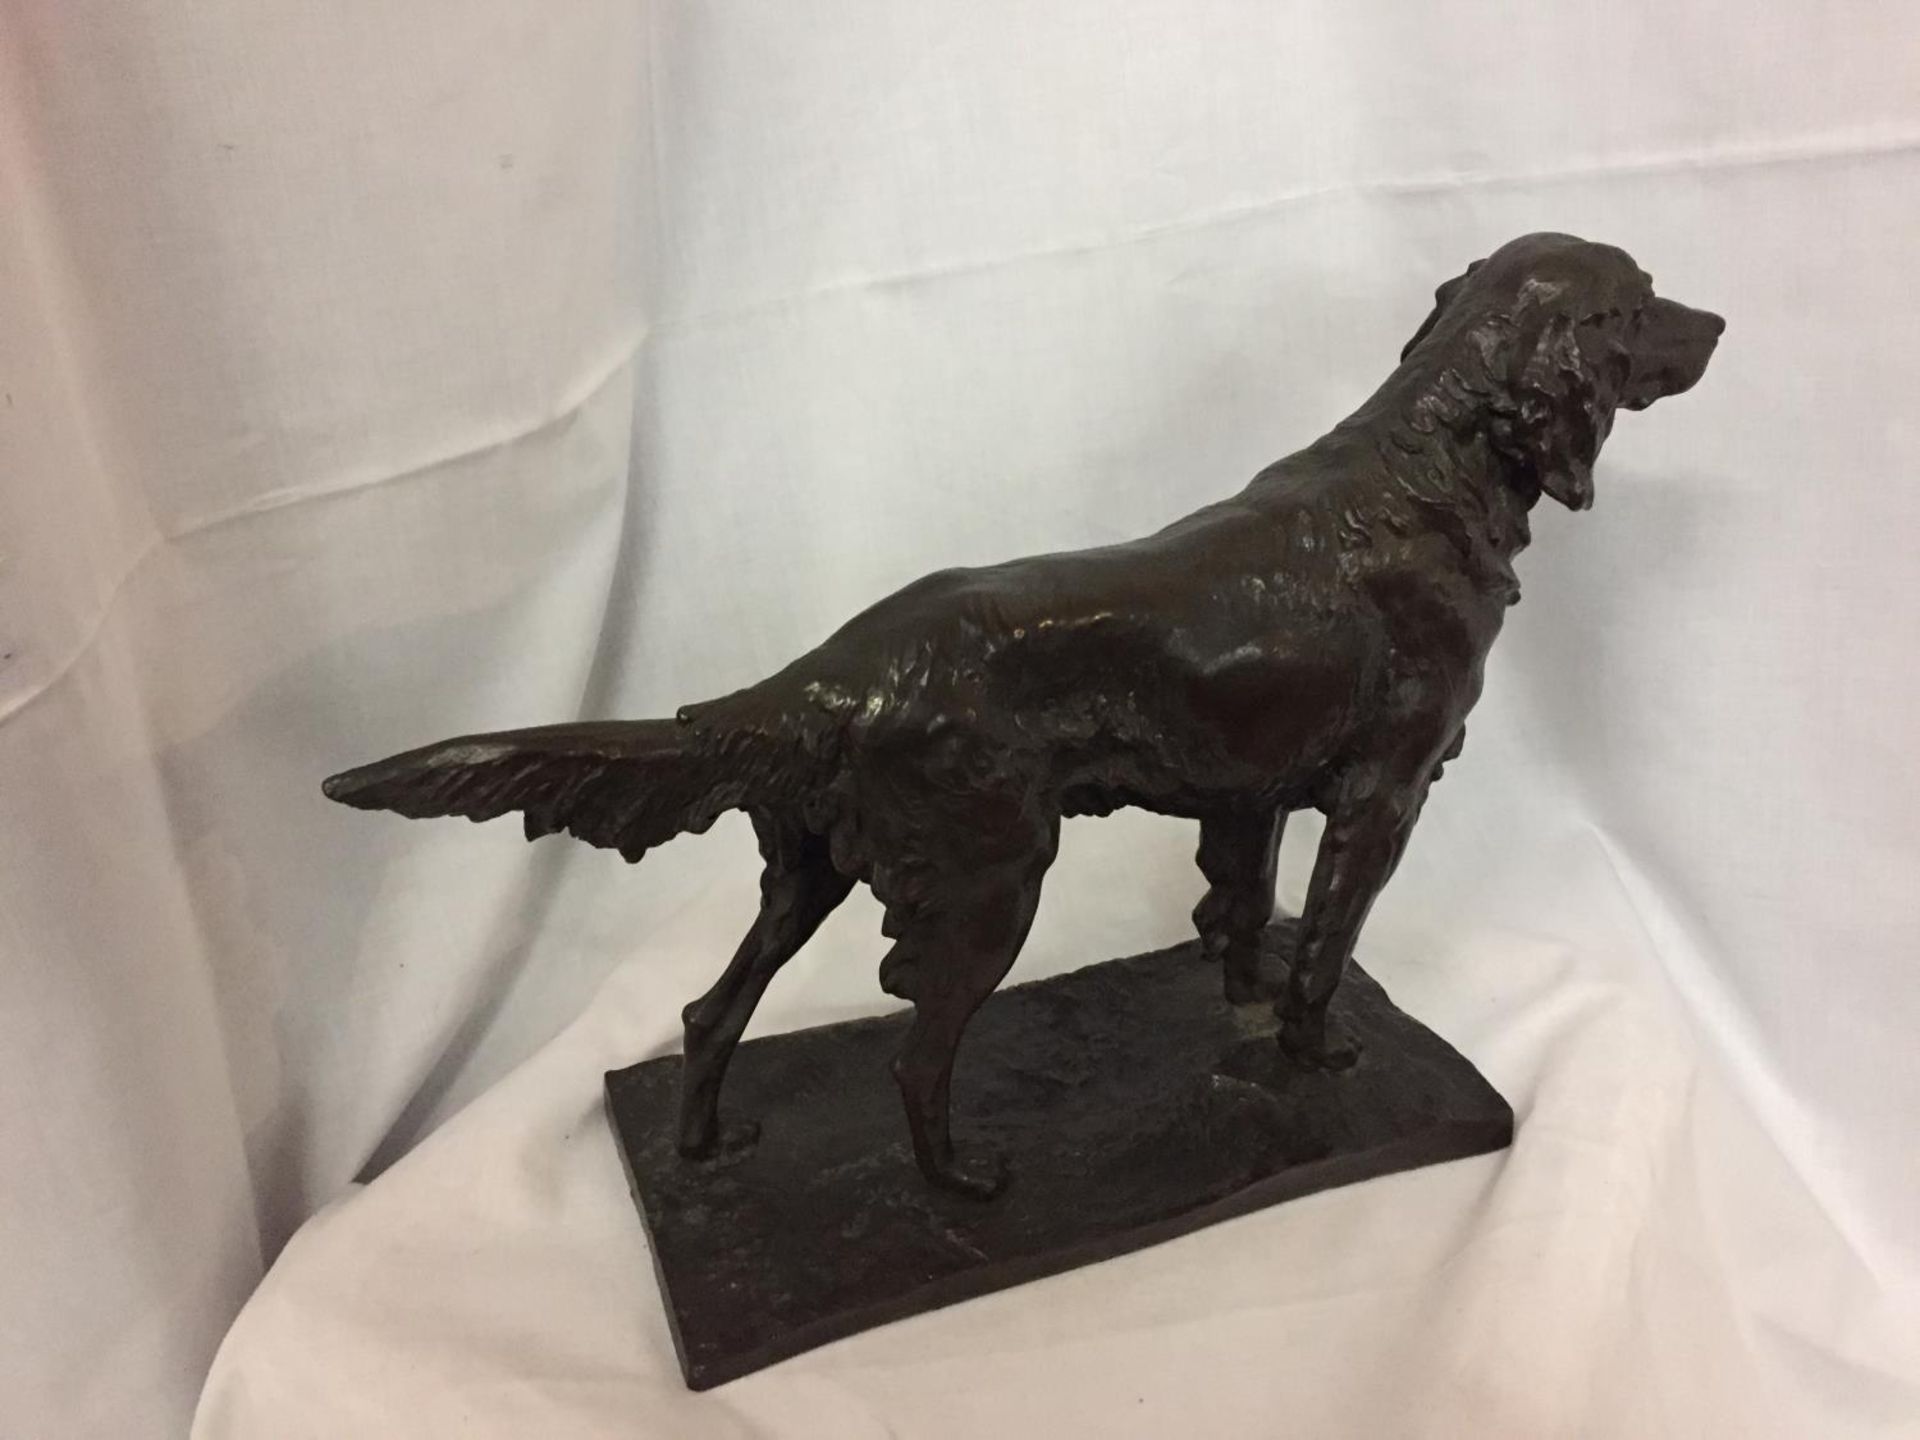 A BRONZE STYLE SCULPTURE OF A RETREIVER DOG. LENGTH 51CM, HEIGHT 35CM - Image 3 of 6